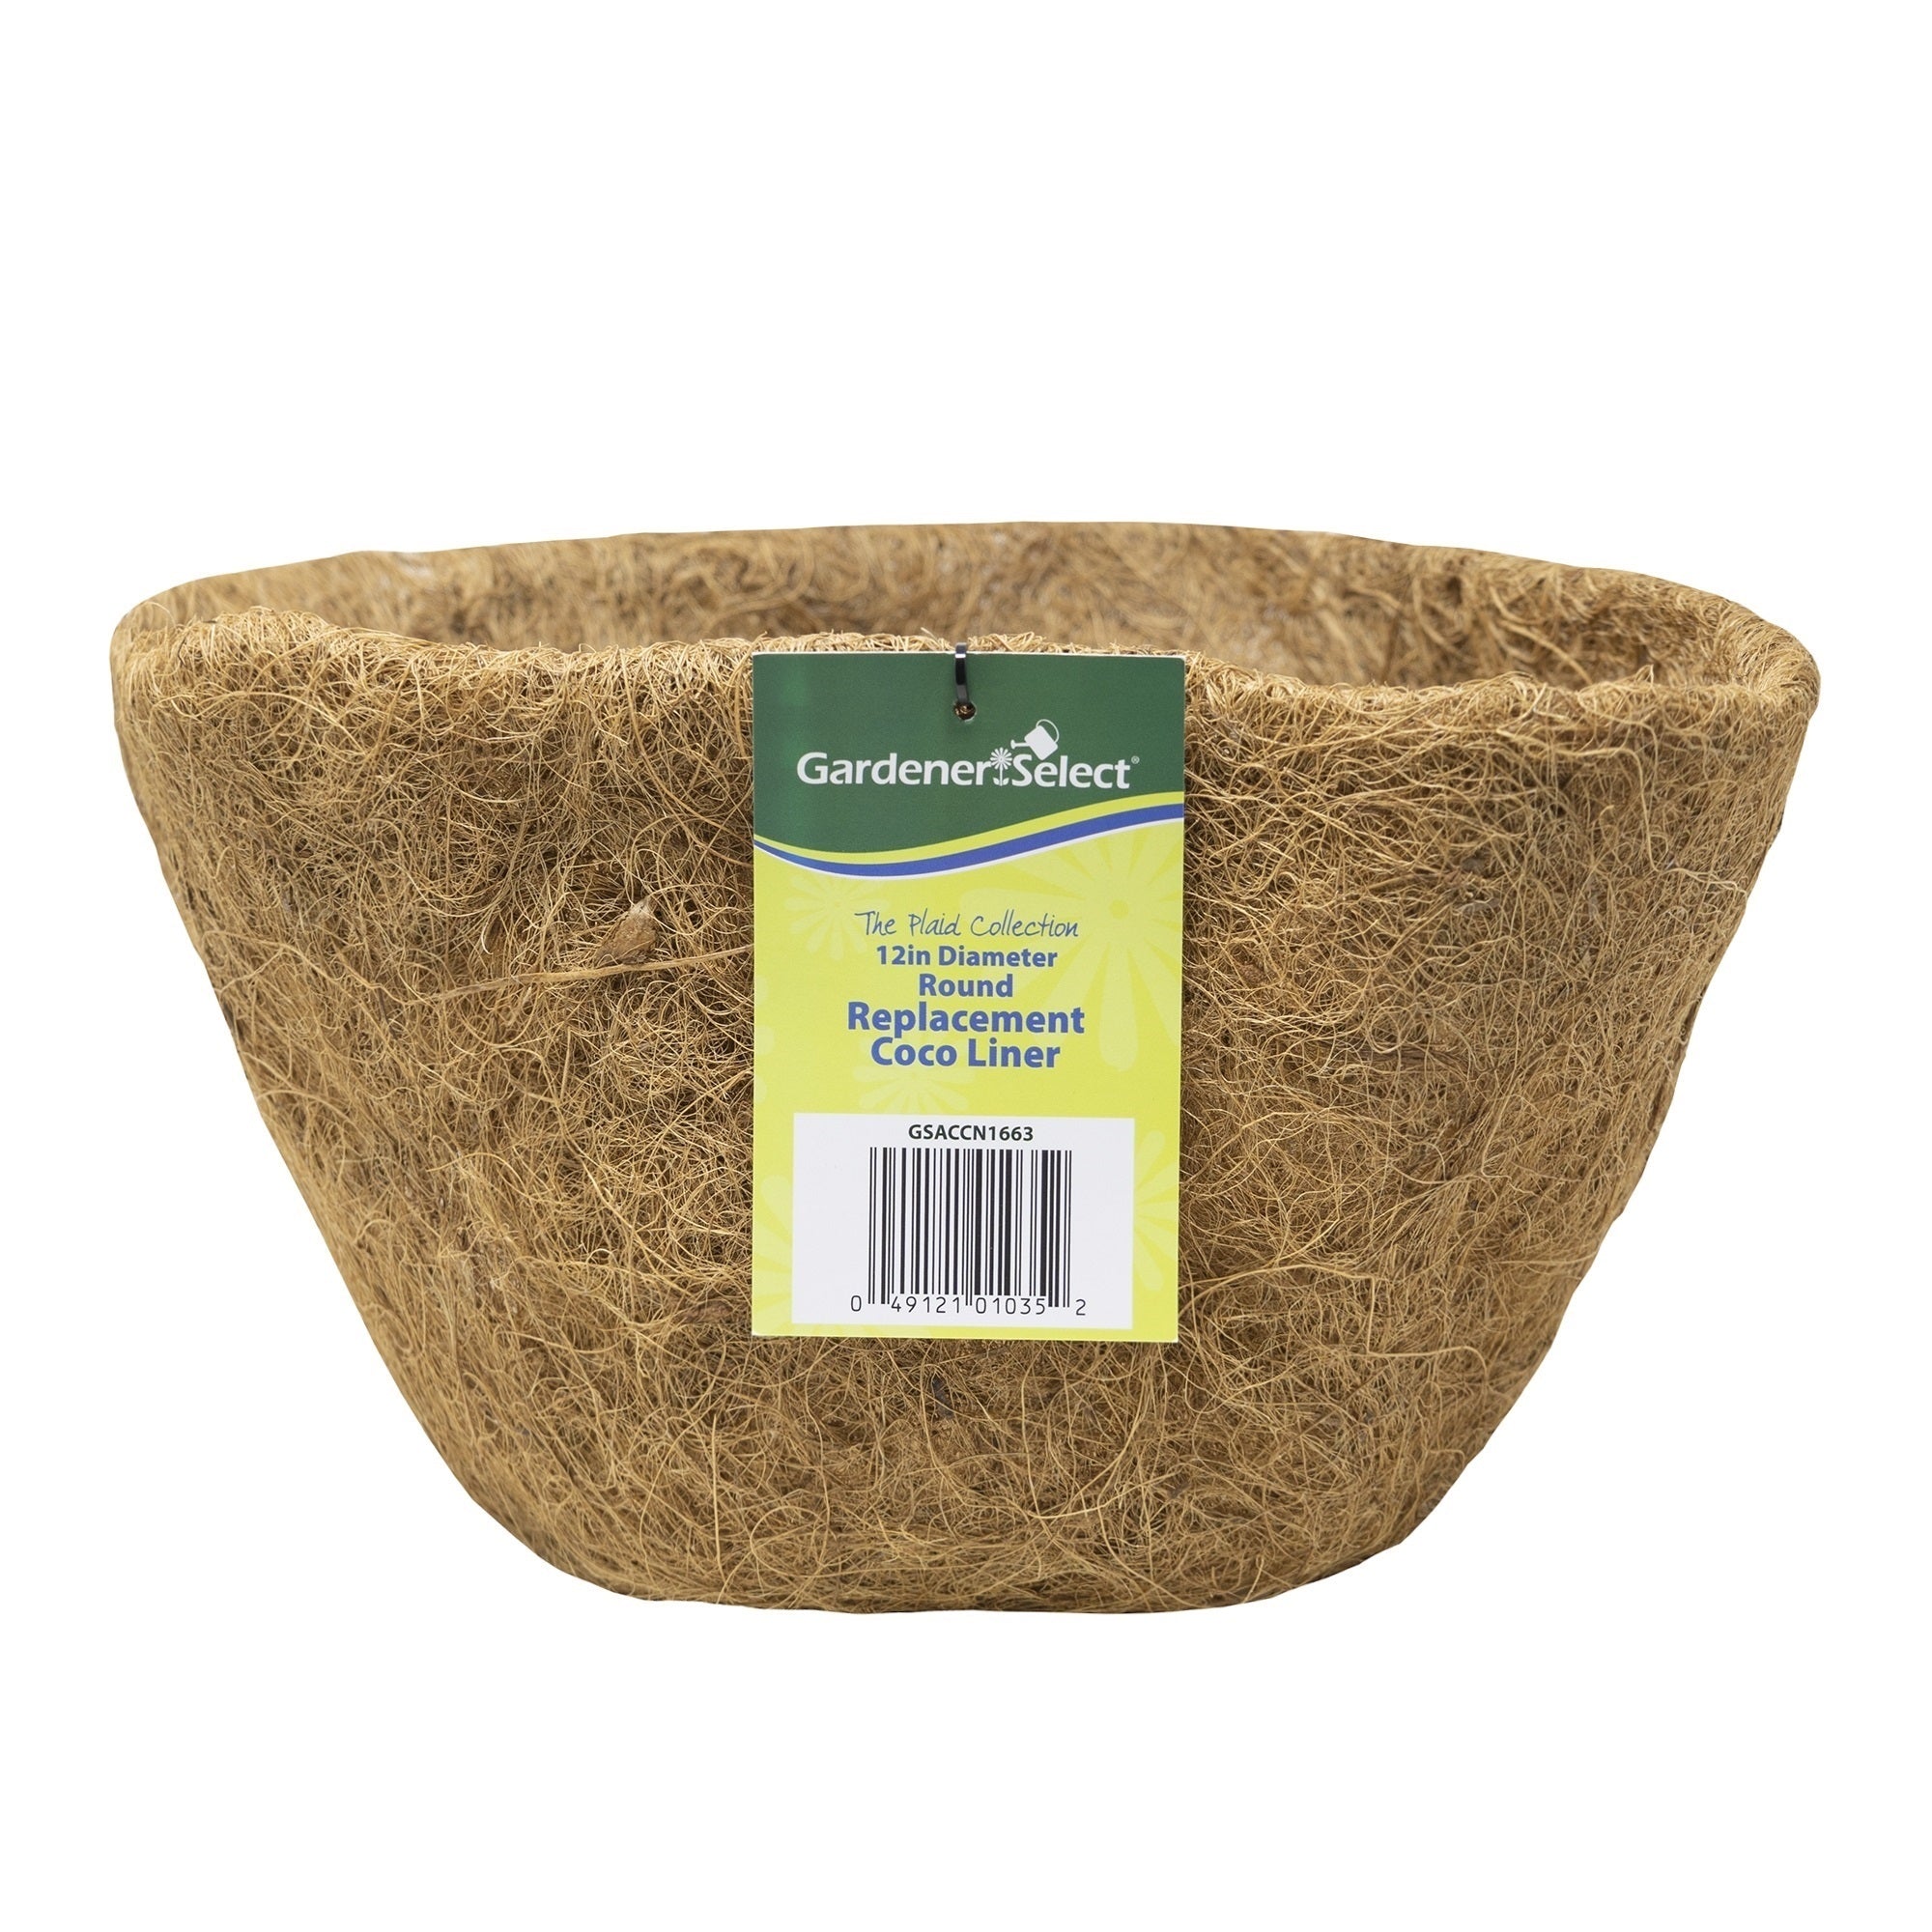 Gardener Select Round Coconut Coir Coco Liner for Planters and Baskets, 12"